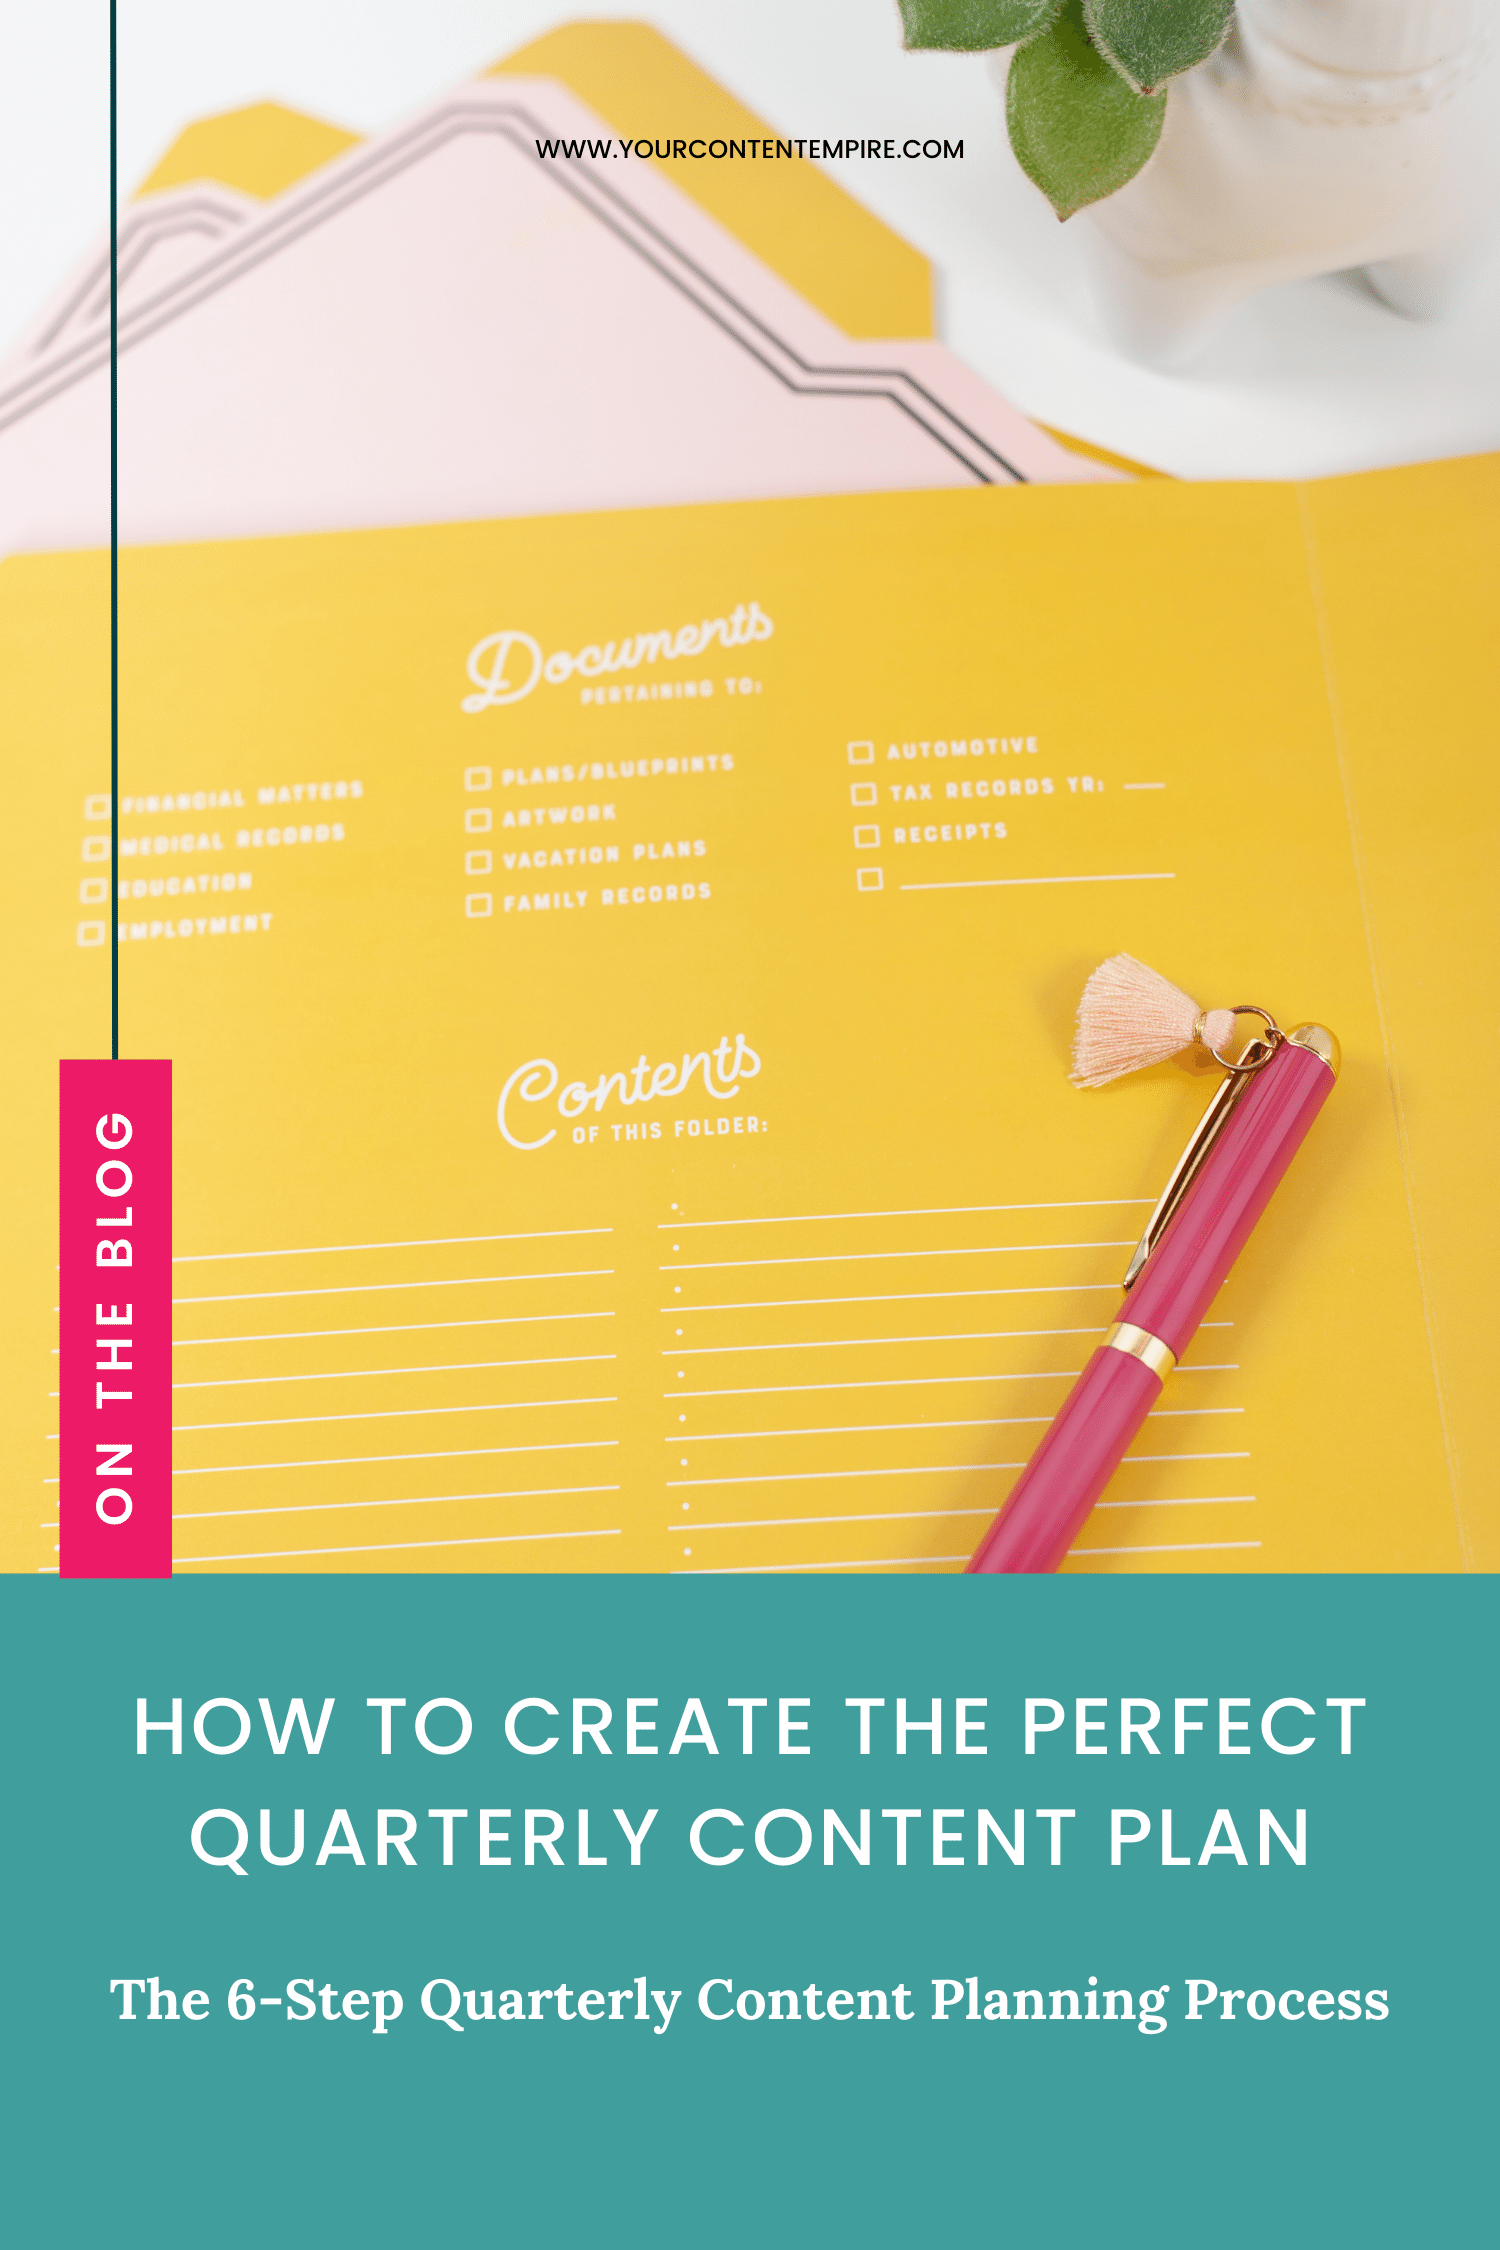 How to Create the Perfect Quarterly Content Plan